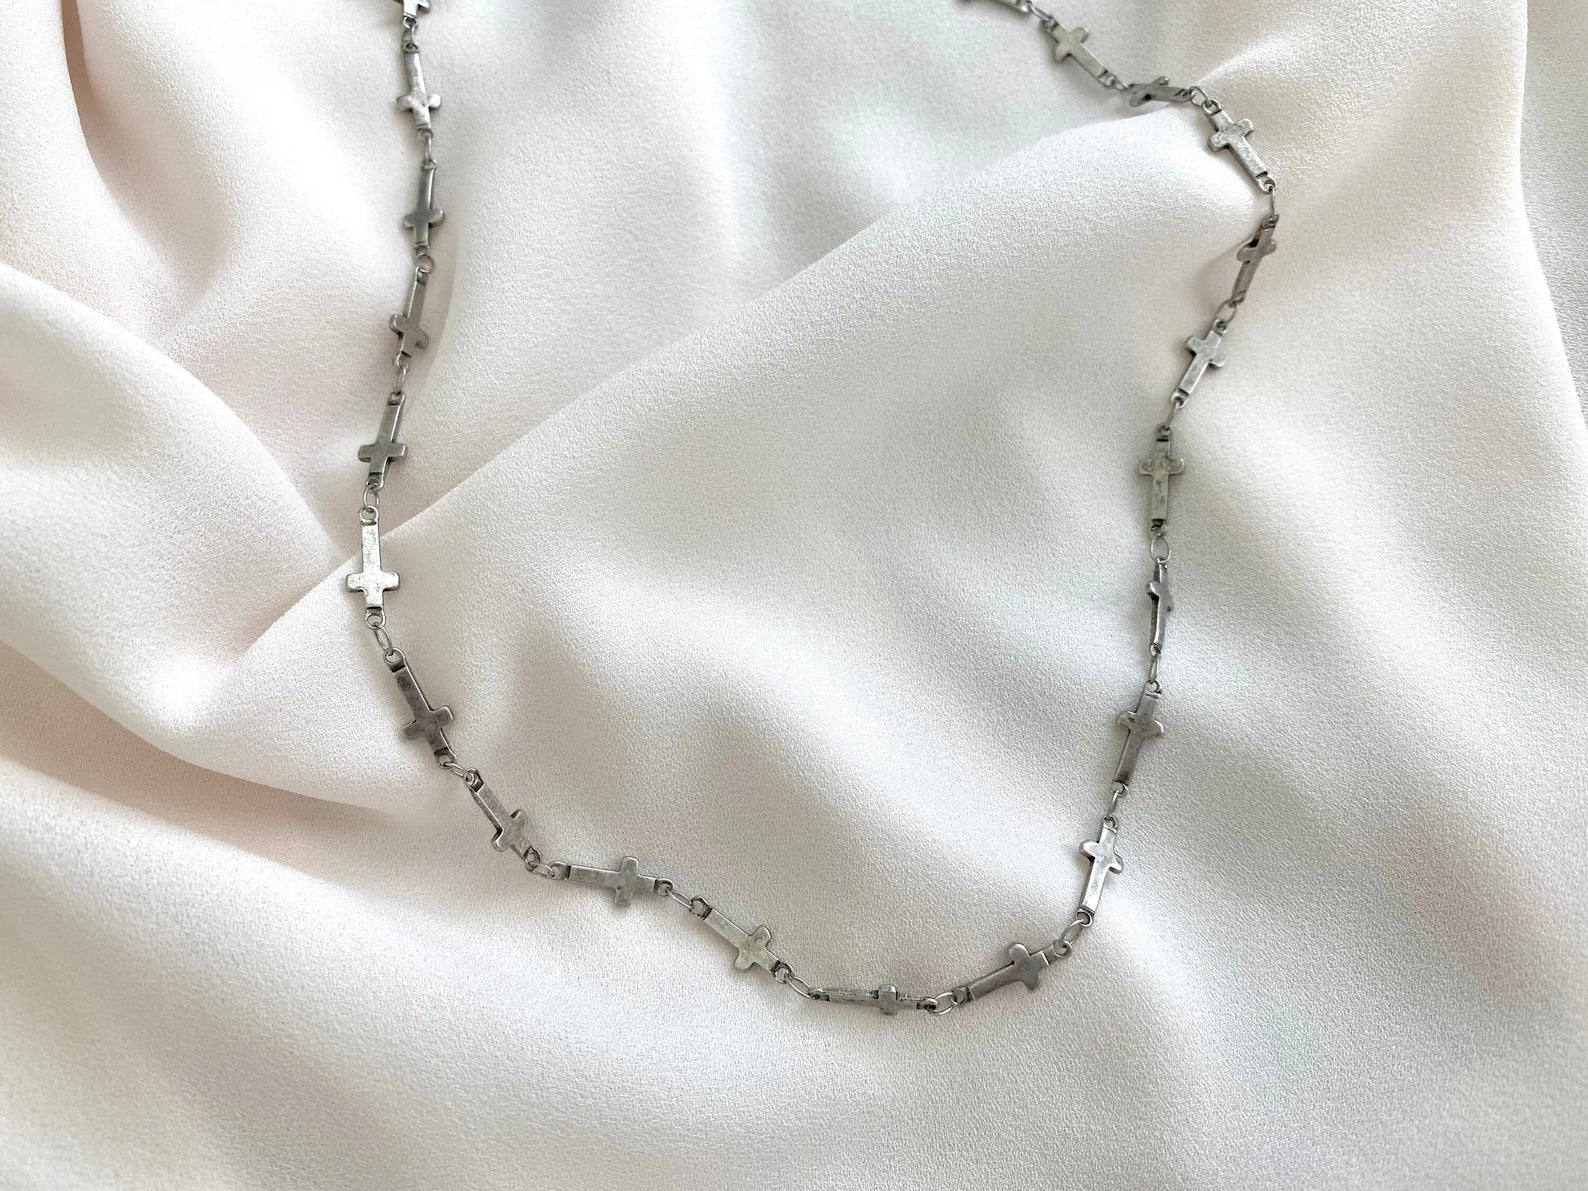 Antique Silver Cross Chain Necklace